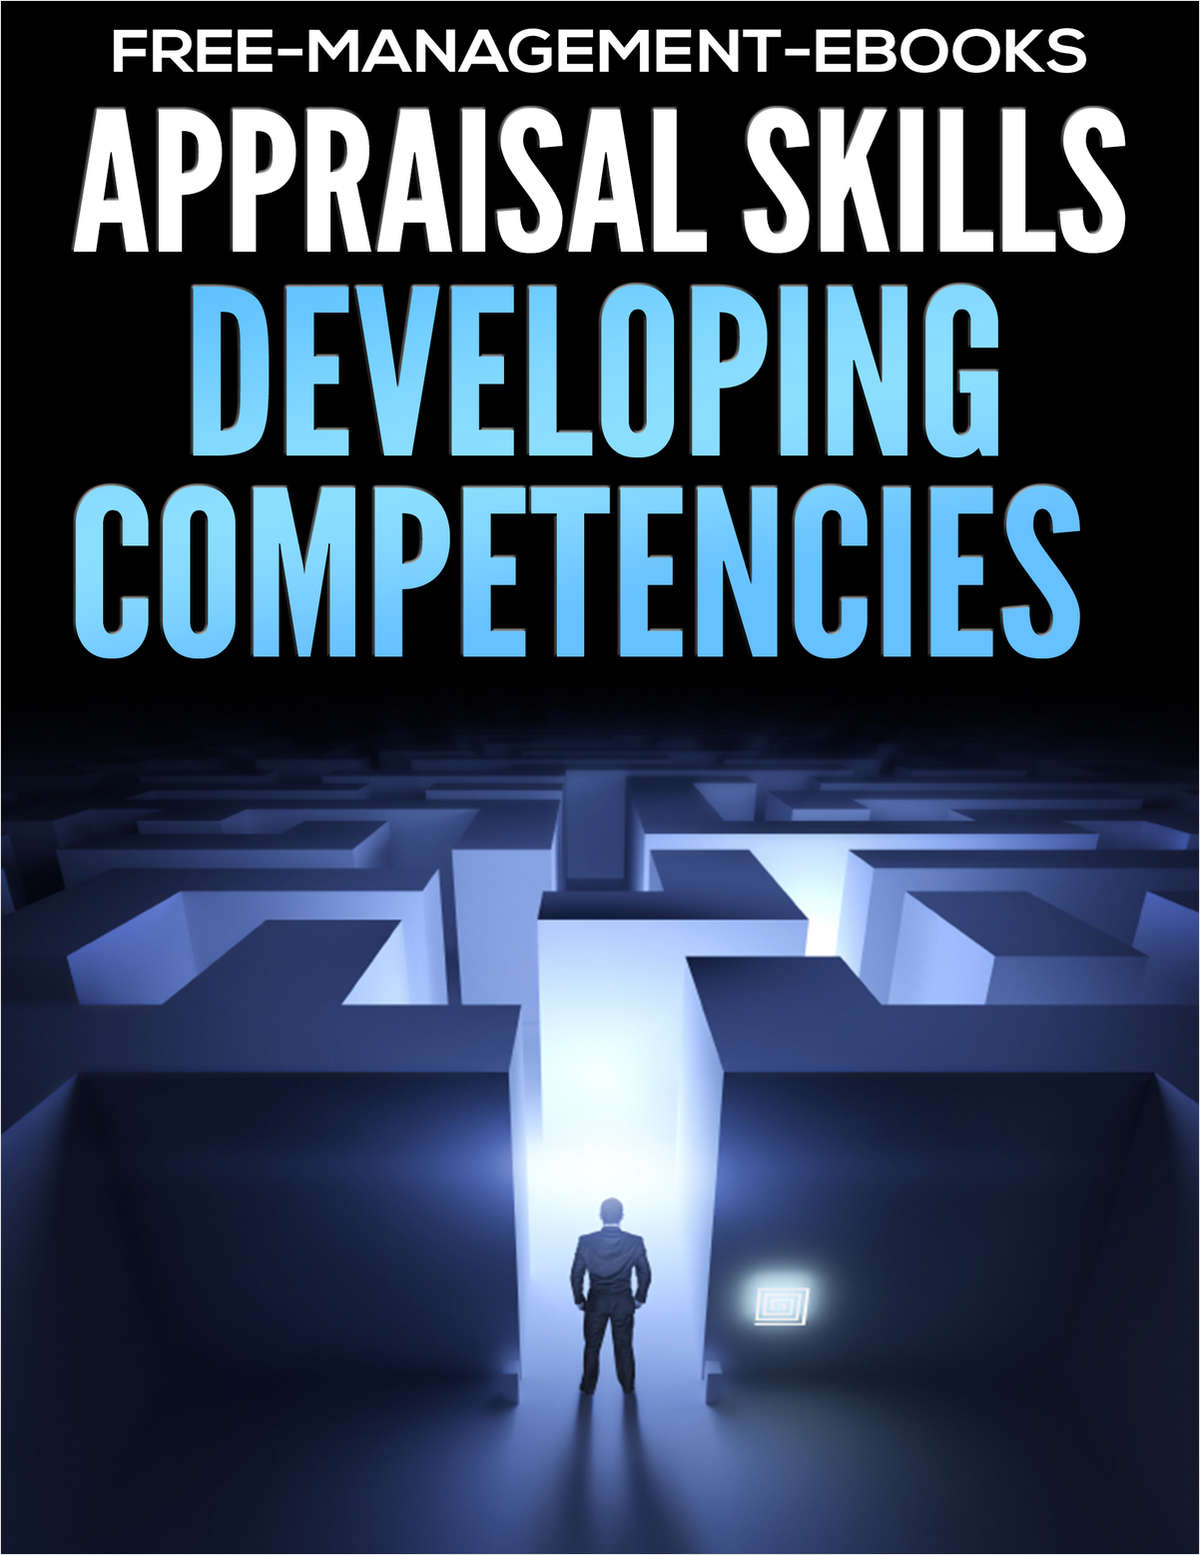 Appraisal Skills - Developing Your Team's Competencies